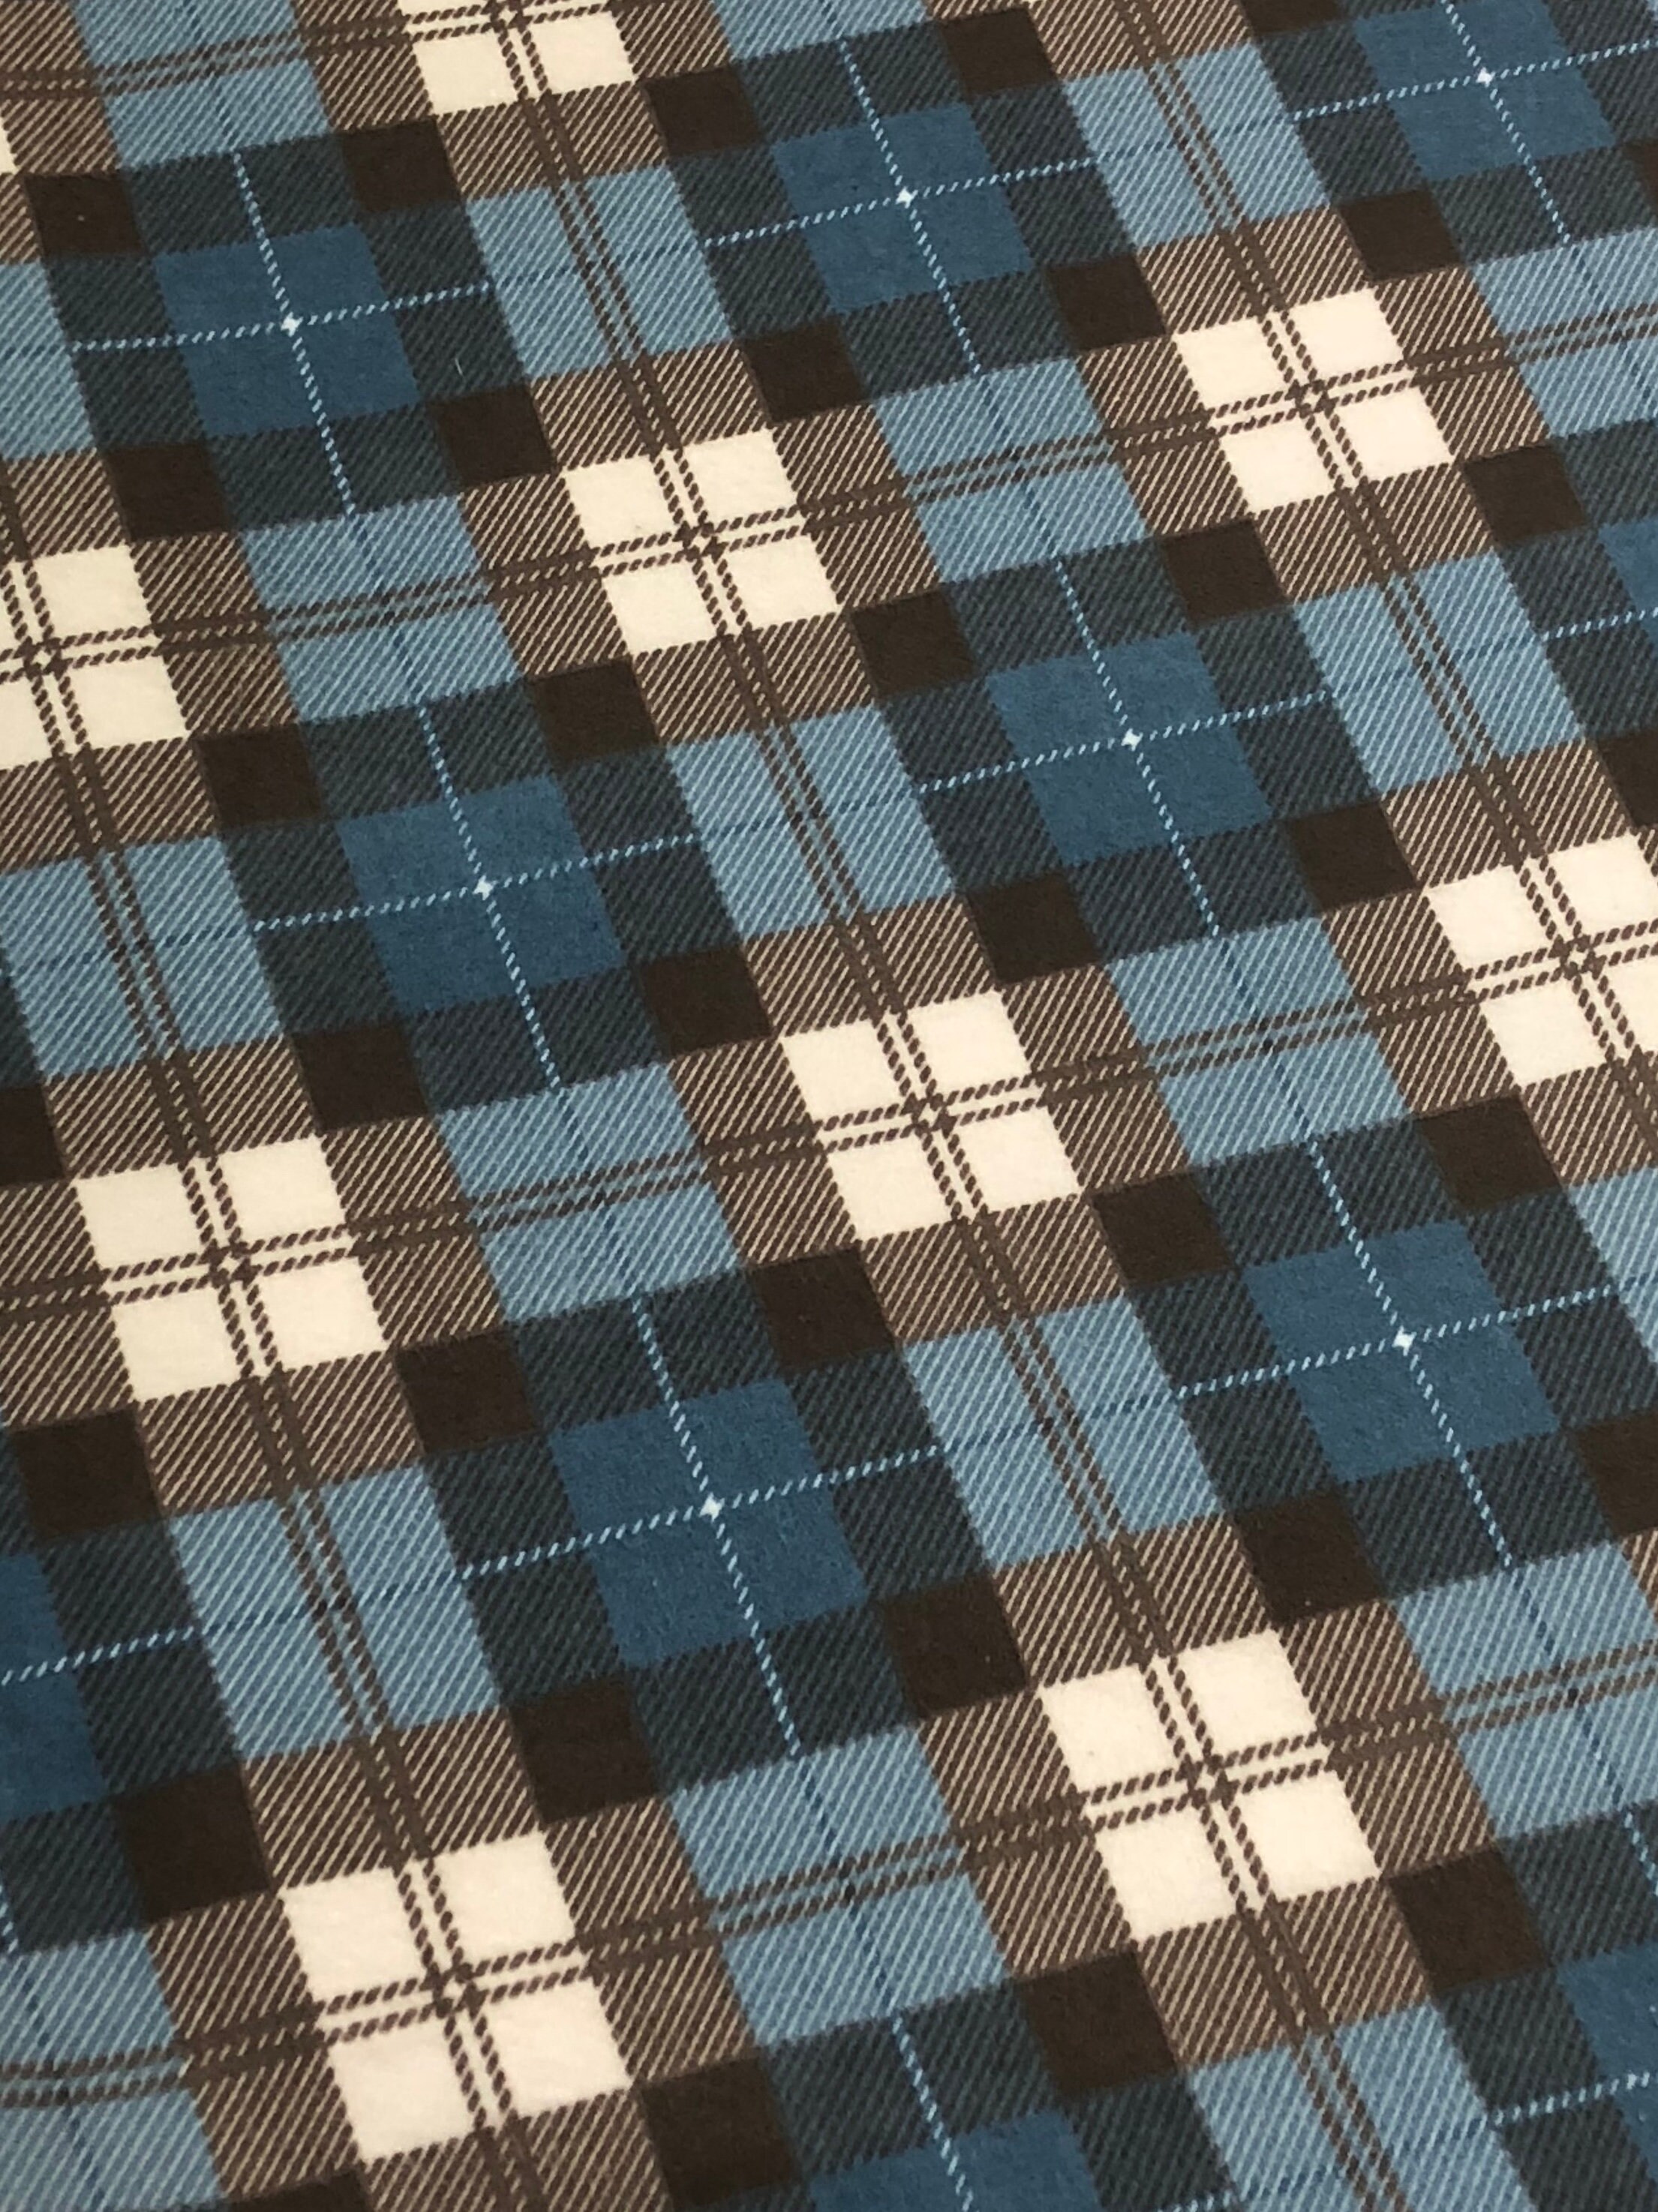 Plaid flannel teal brown blue red navy RBD design by Riley | Etsy